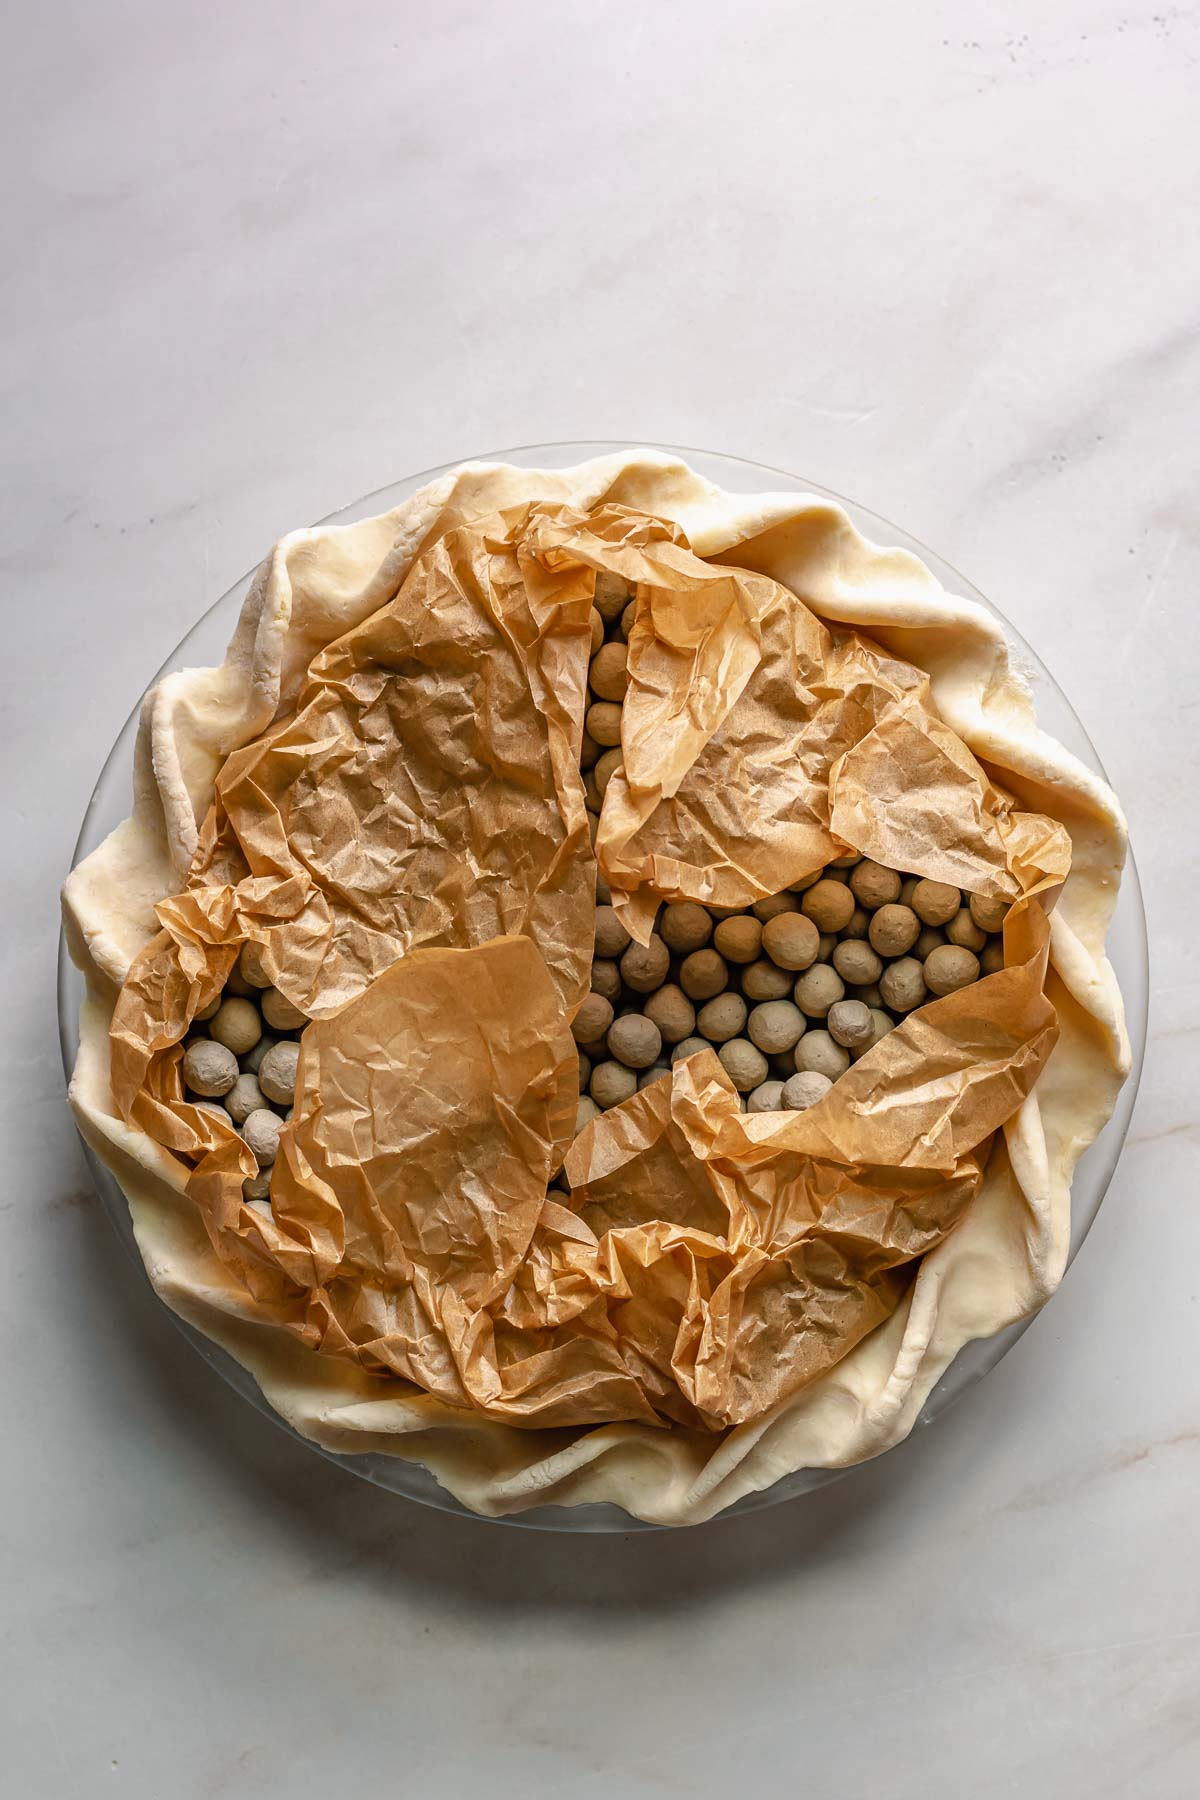 Pie crust with parchment and pie weights.